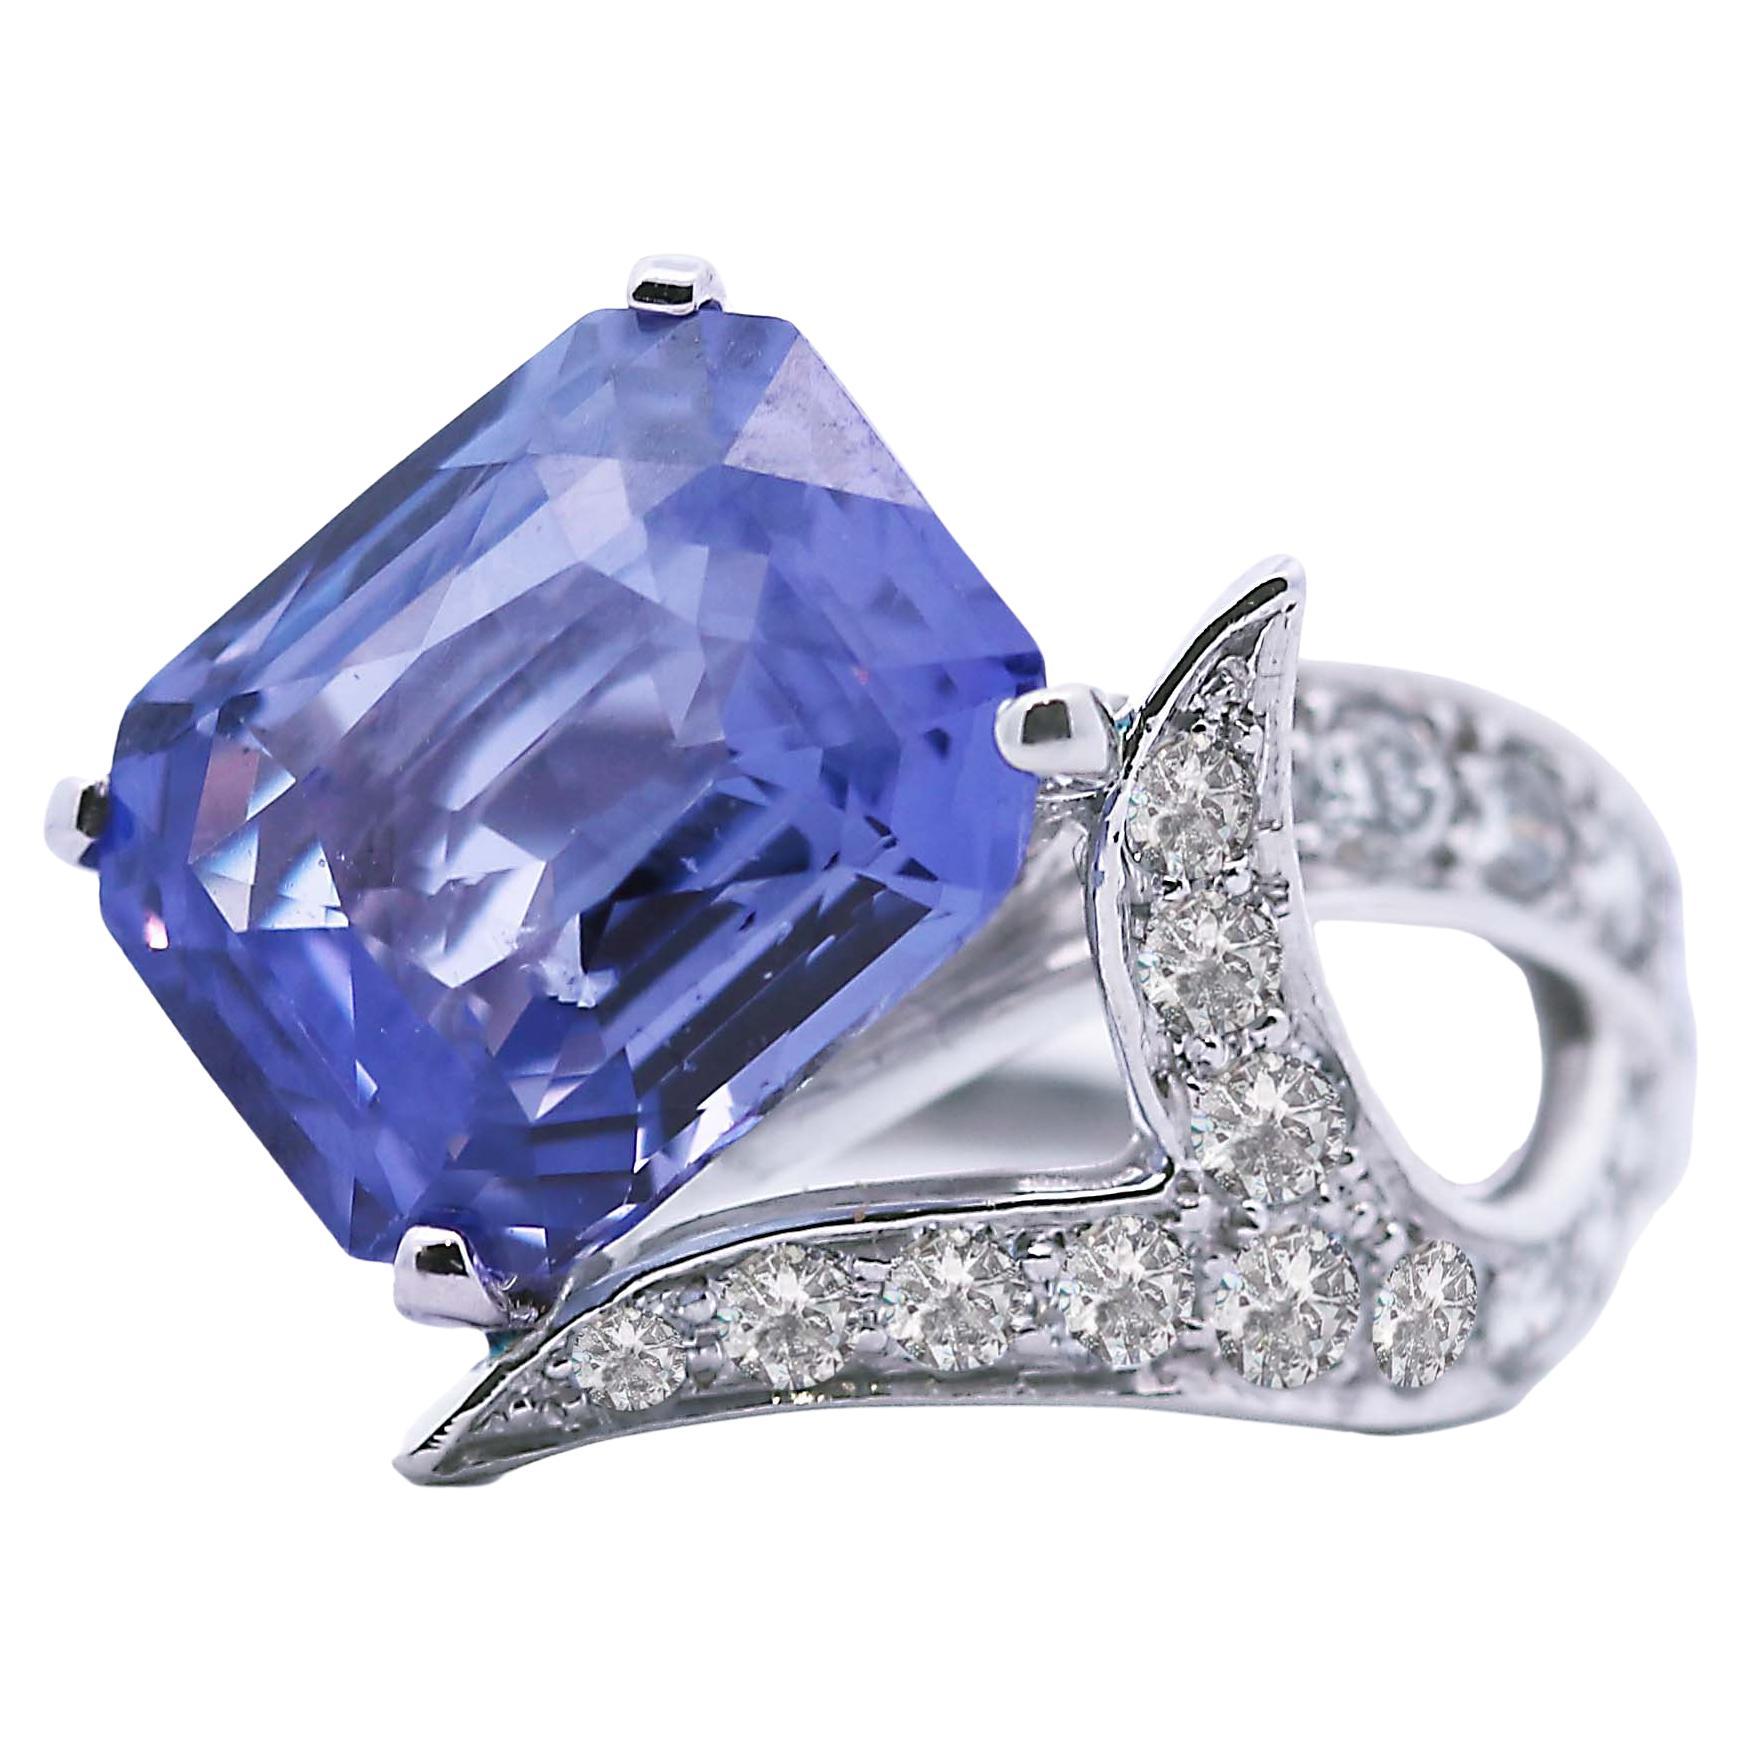 What is a color changing sapphire?